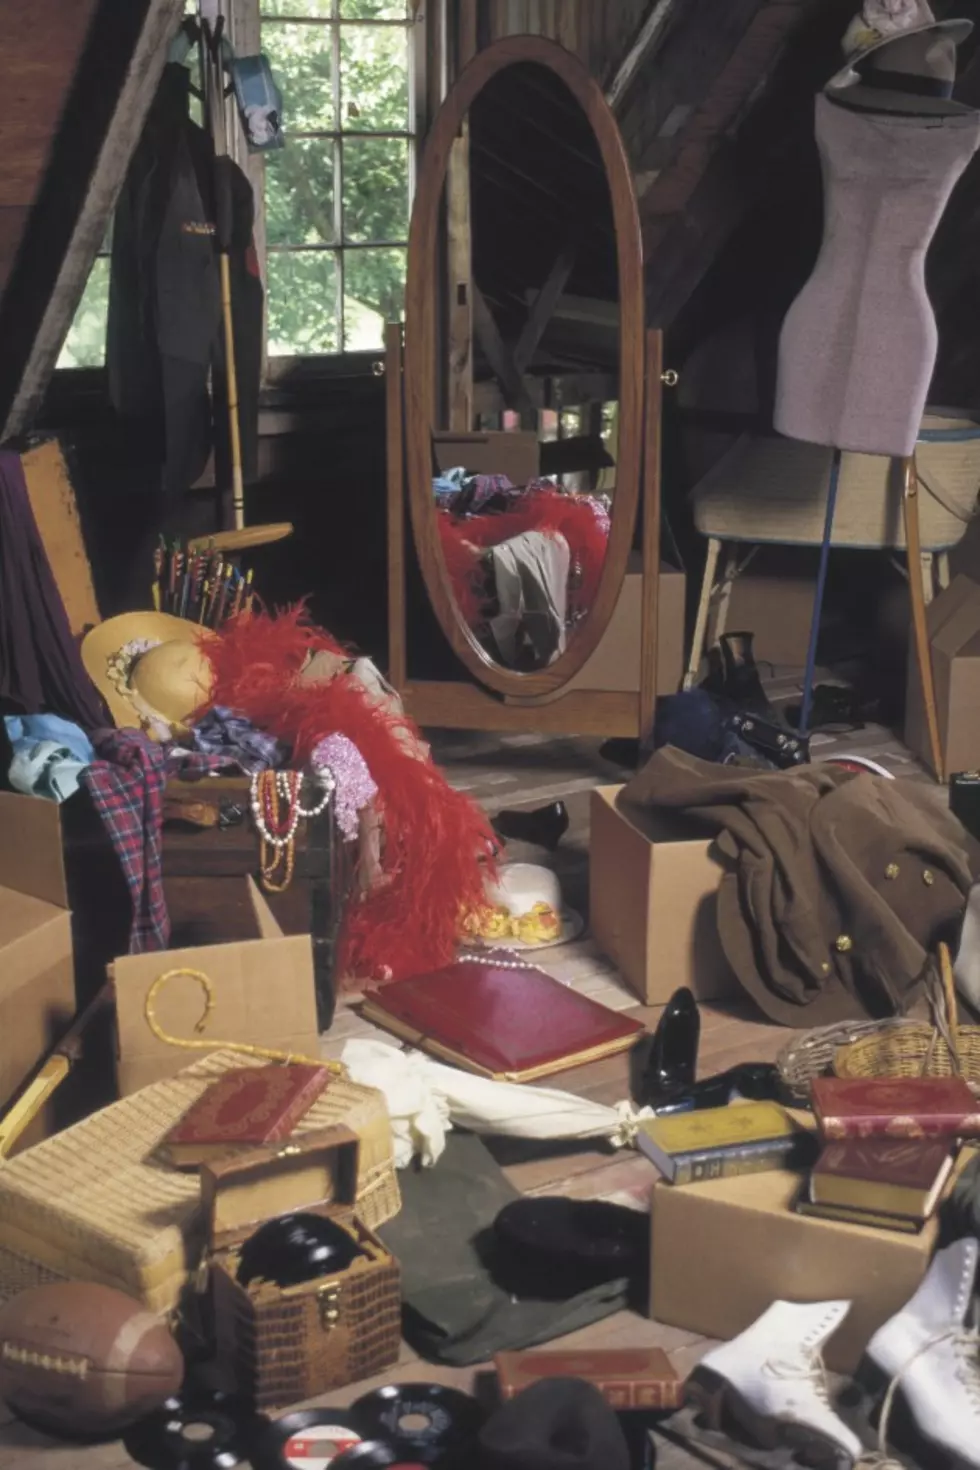 Basic Tips for an Awesome Garage Sale